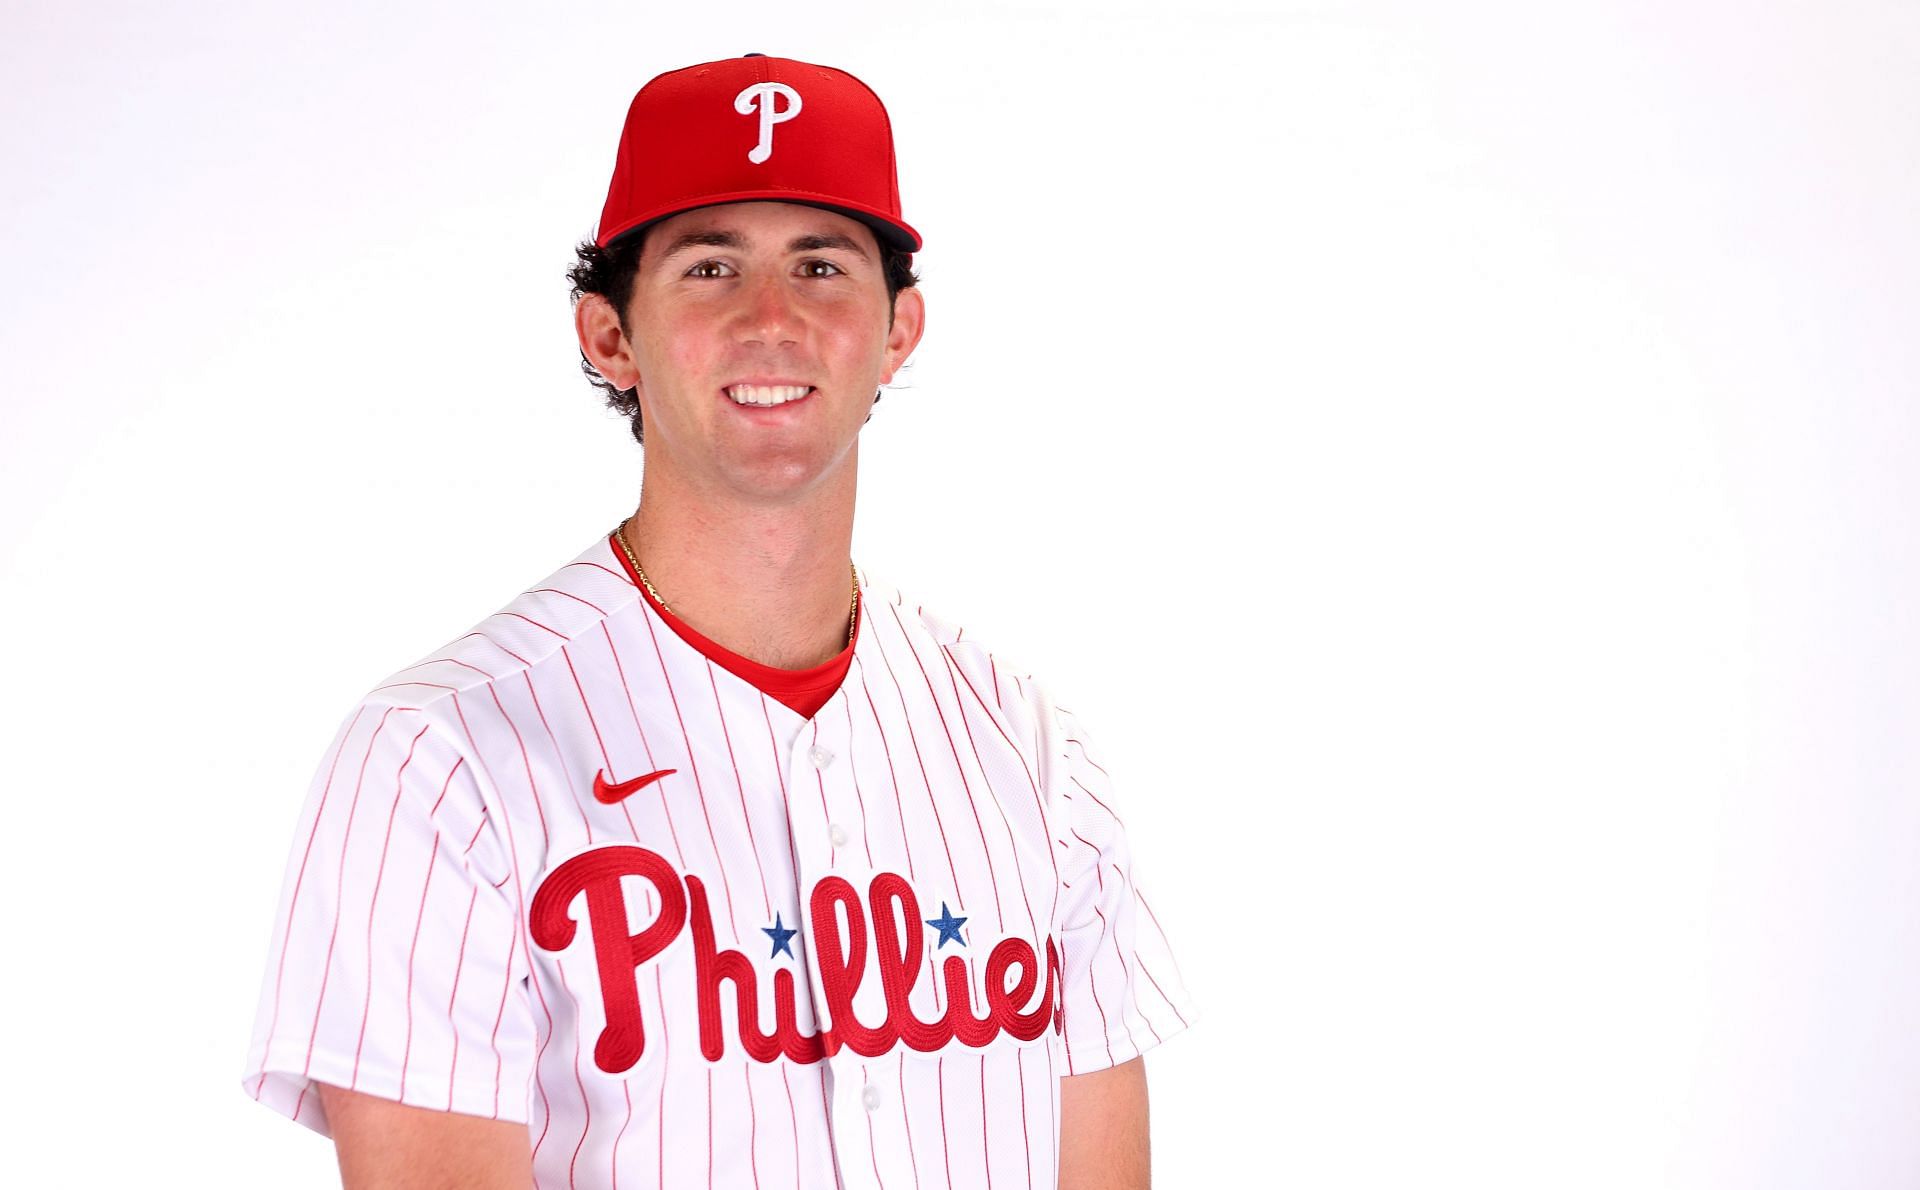 Andrew Painter #76 of the Philadelphia Phillies poses for a portrait during media day